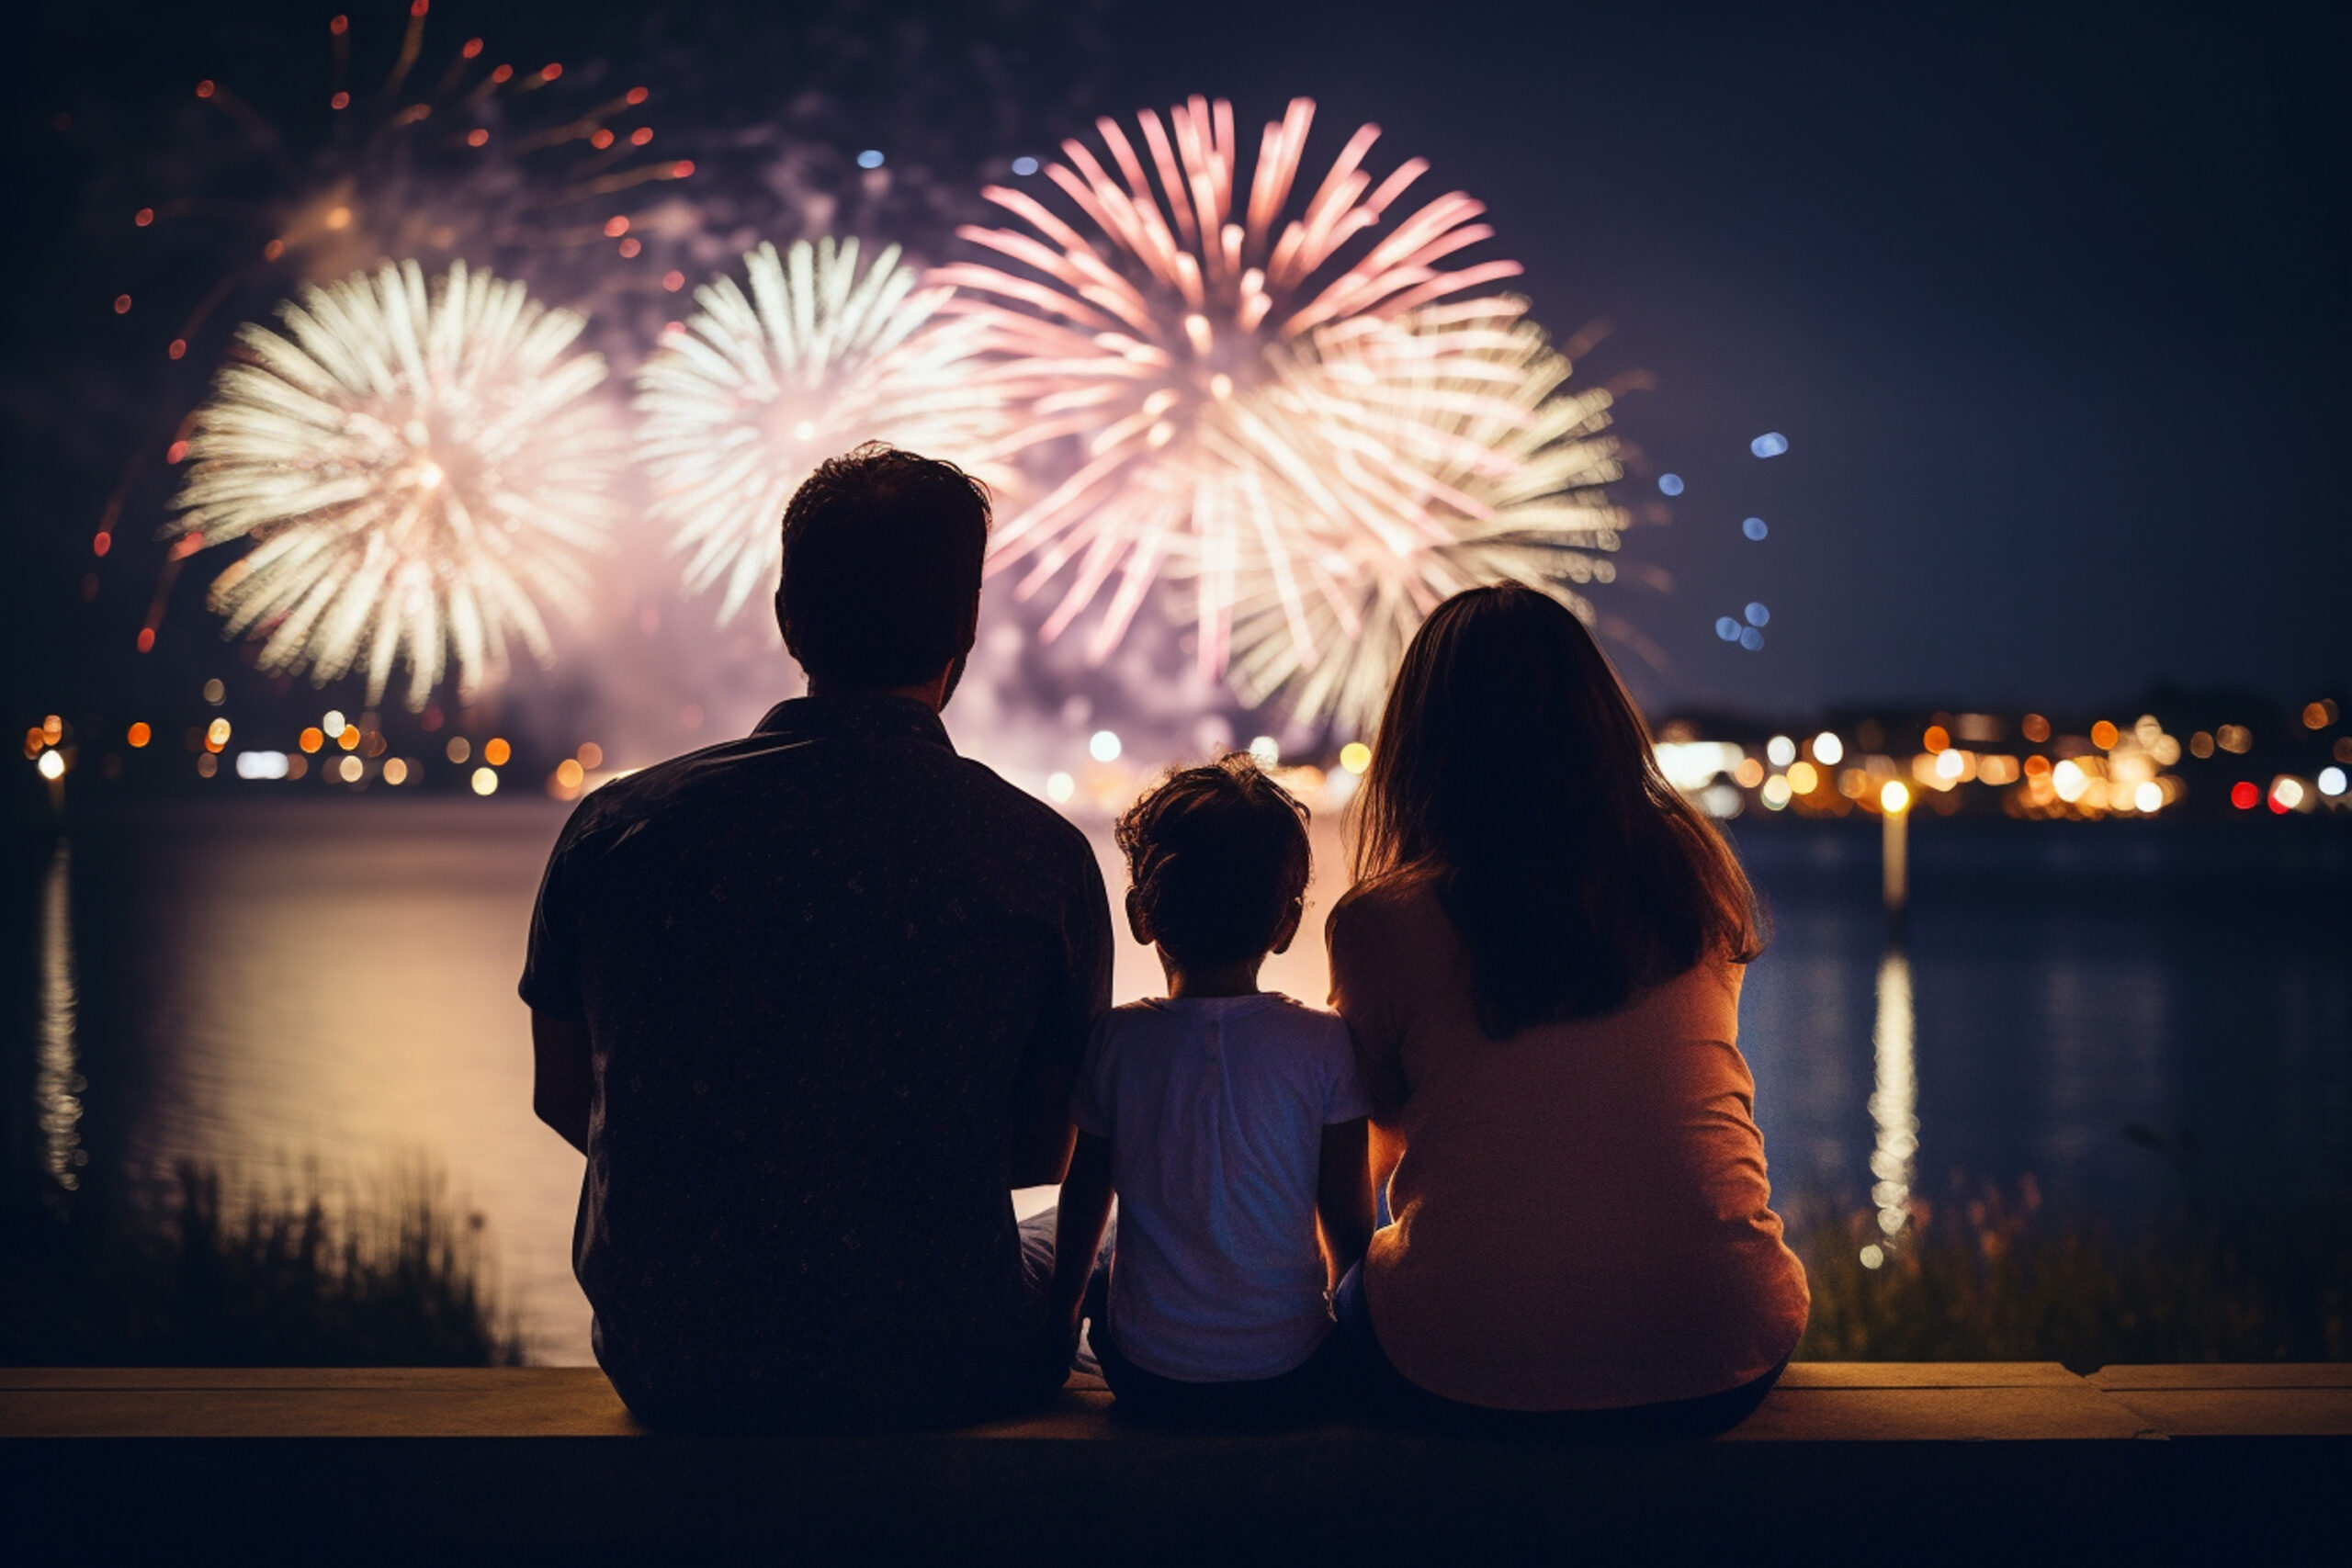 a family watching fireworks bokeh style background